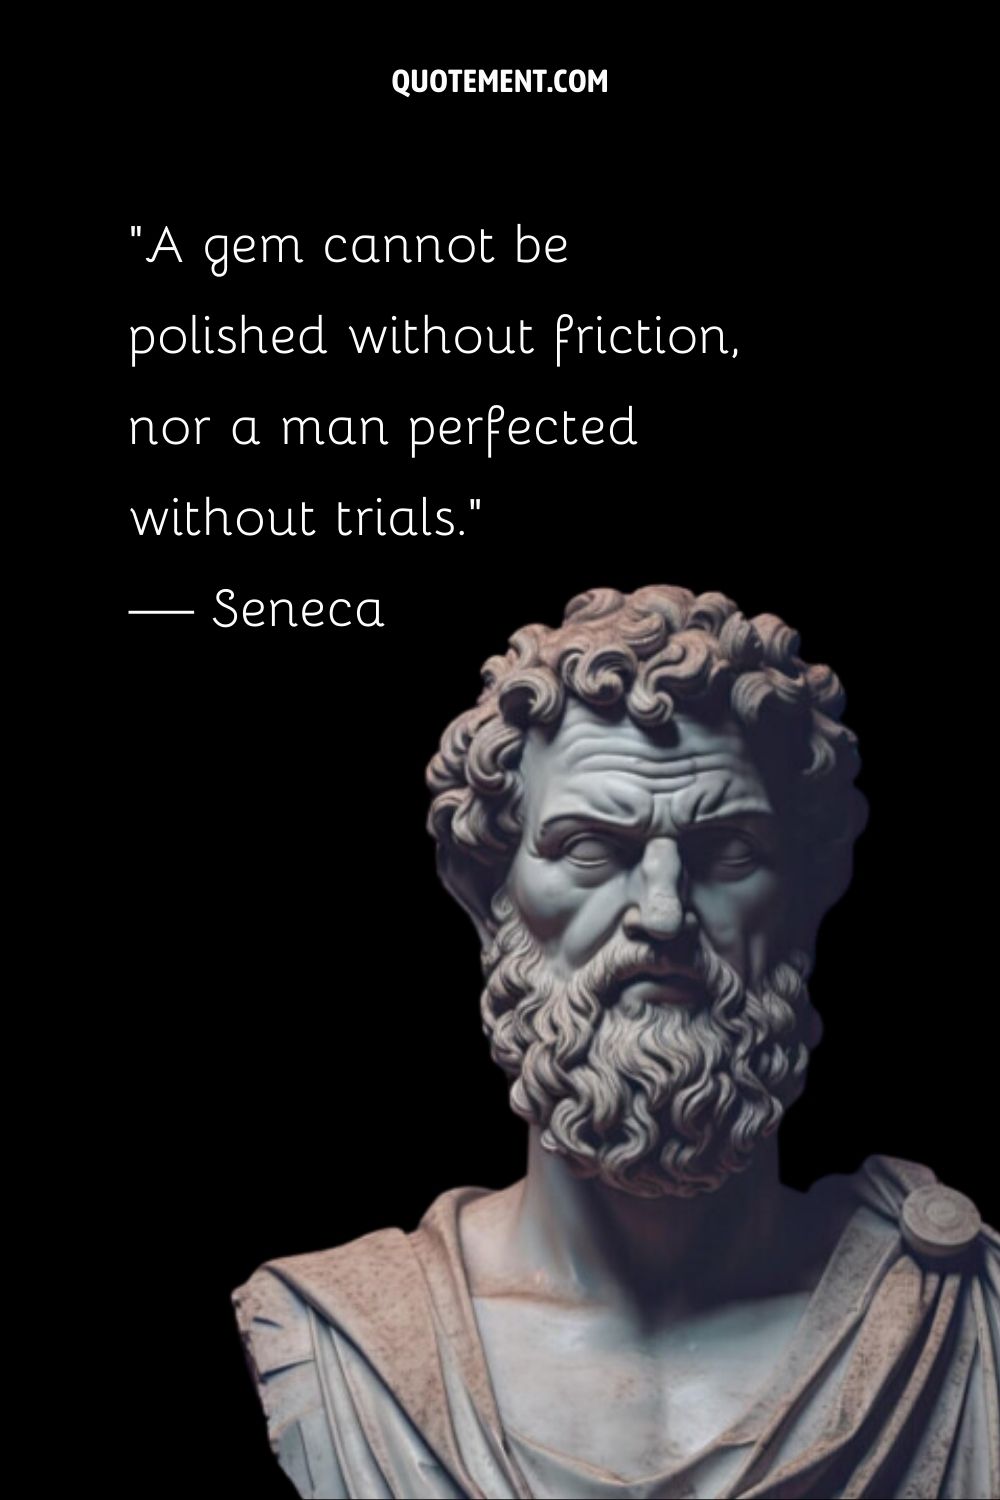 Stoic teachings echoed in the sculpted marble.